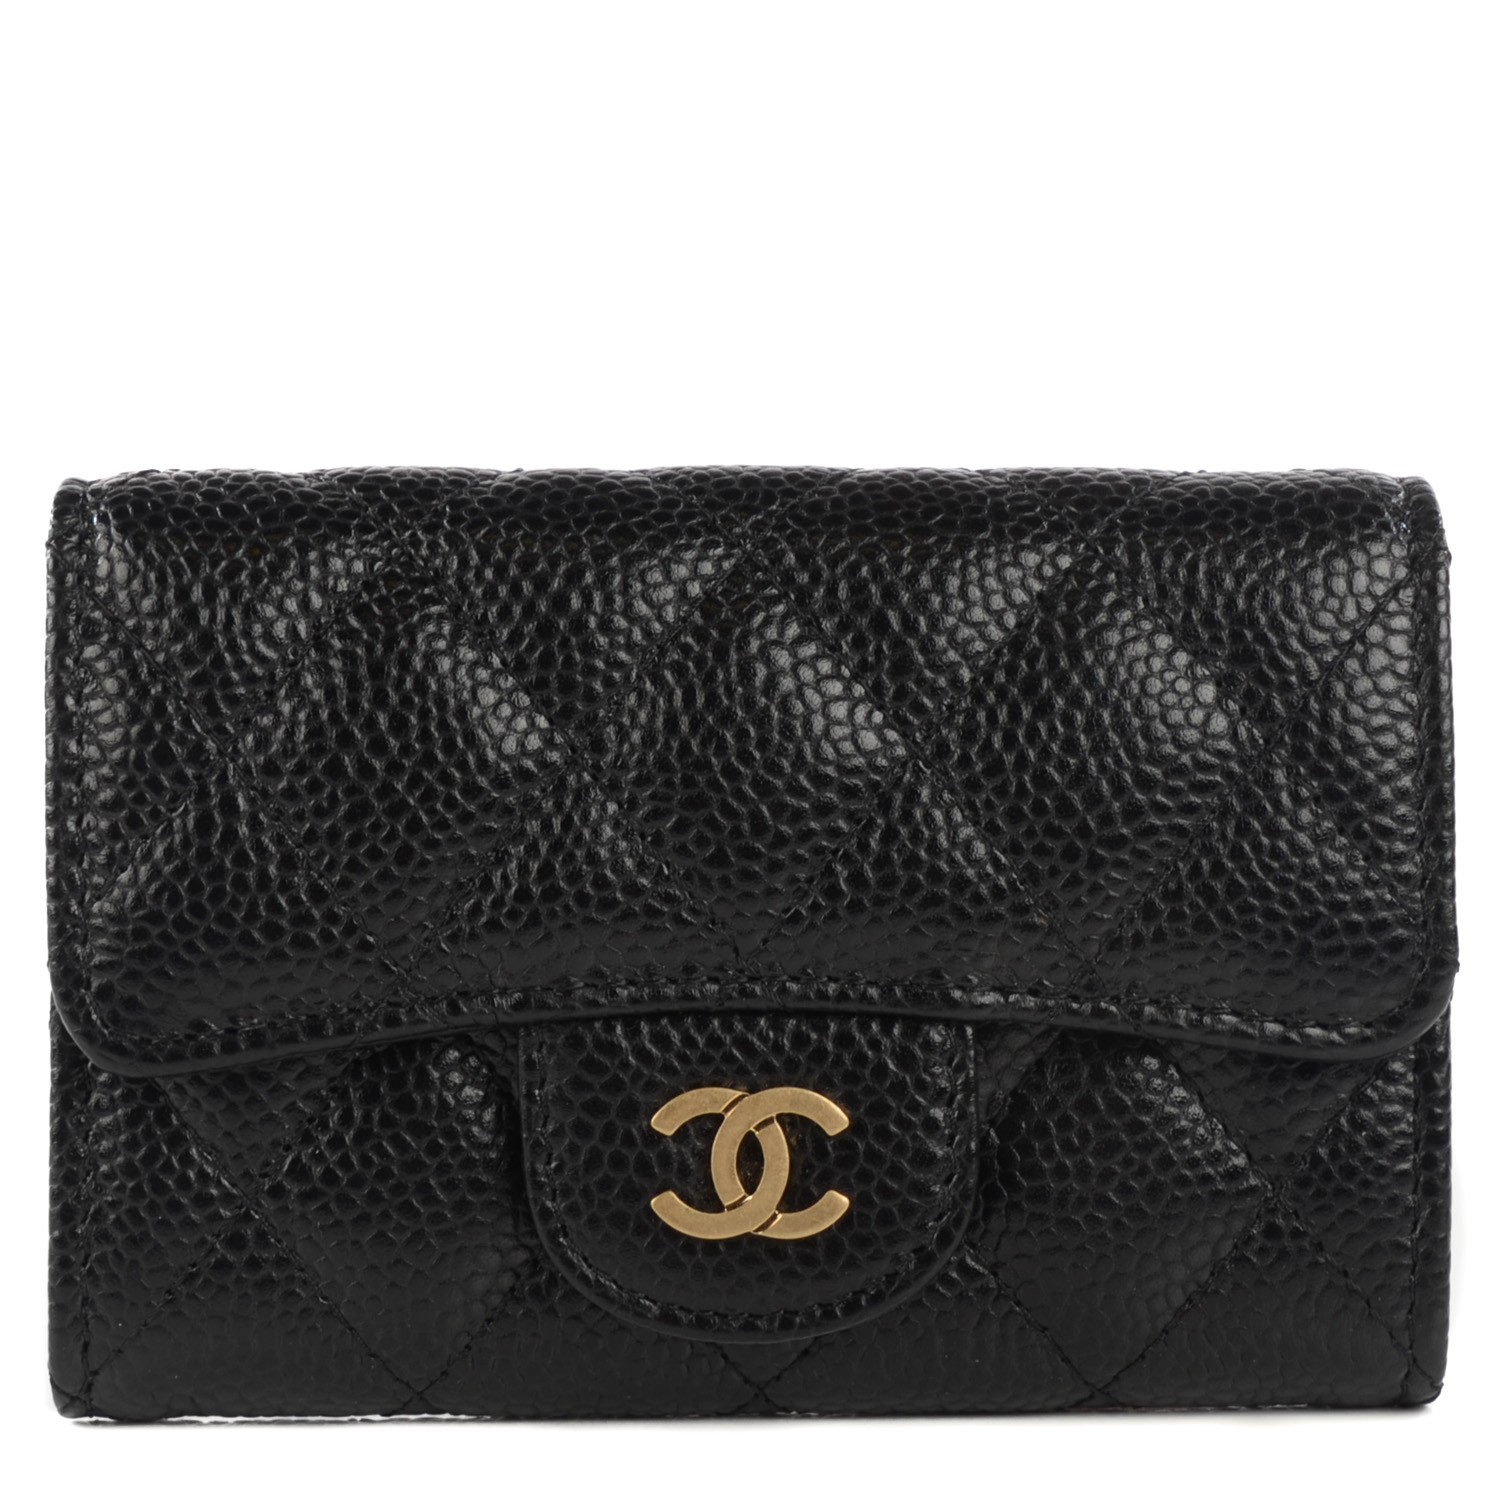 CHANEL Caviar Quilted Coin Purse Black 